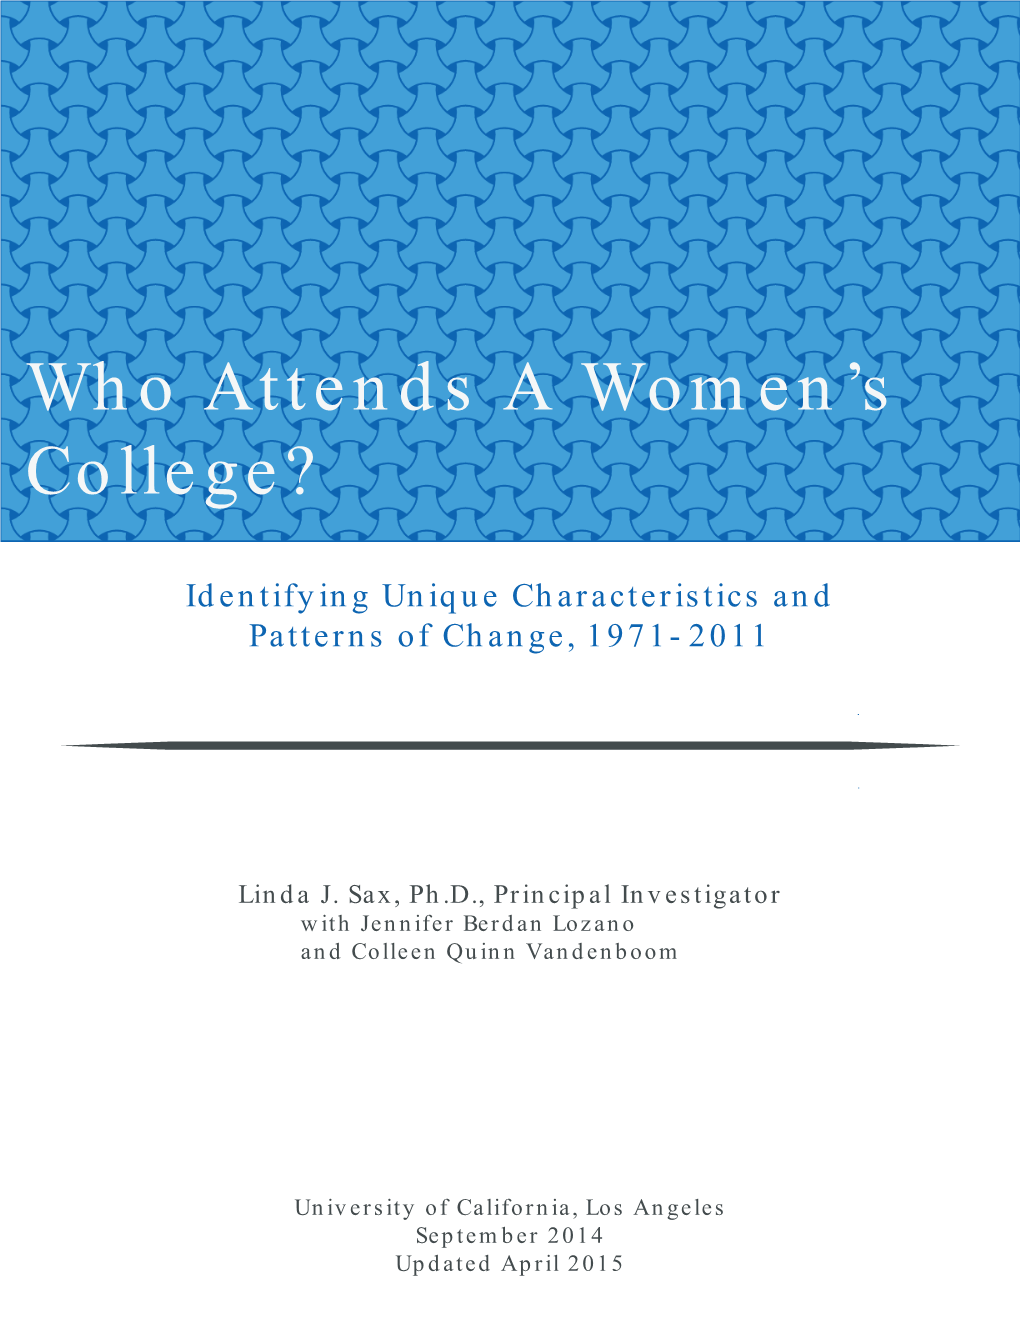 Who Attends a Women's College?